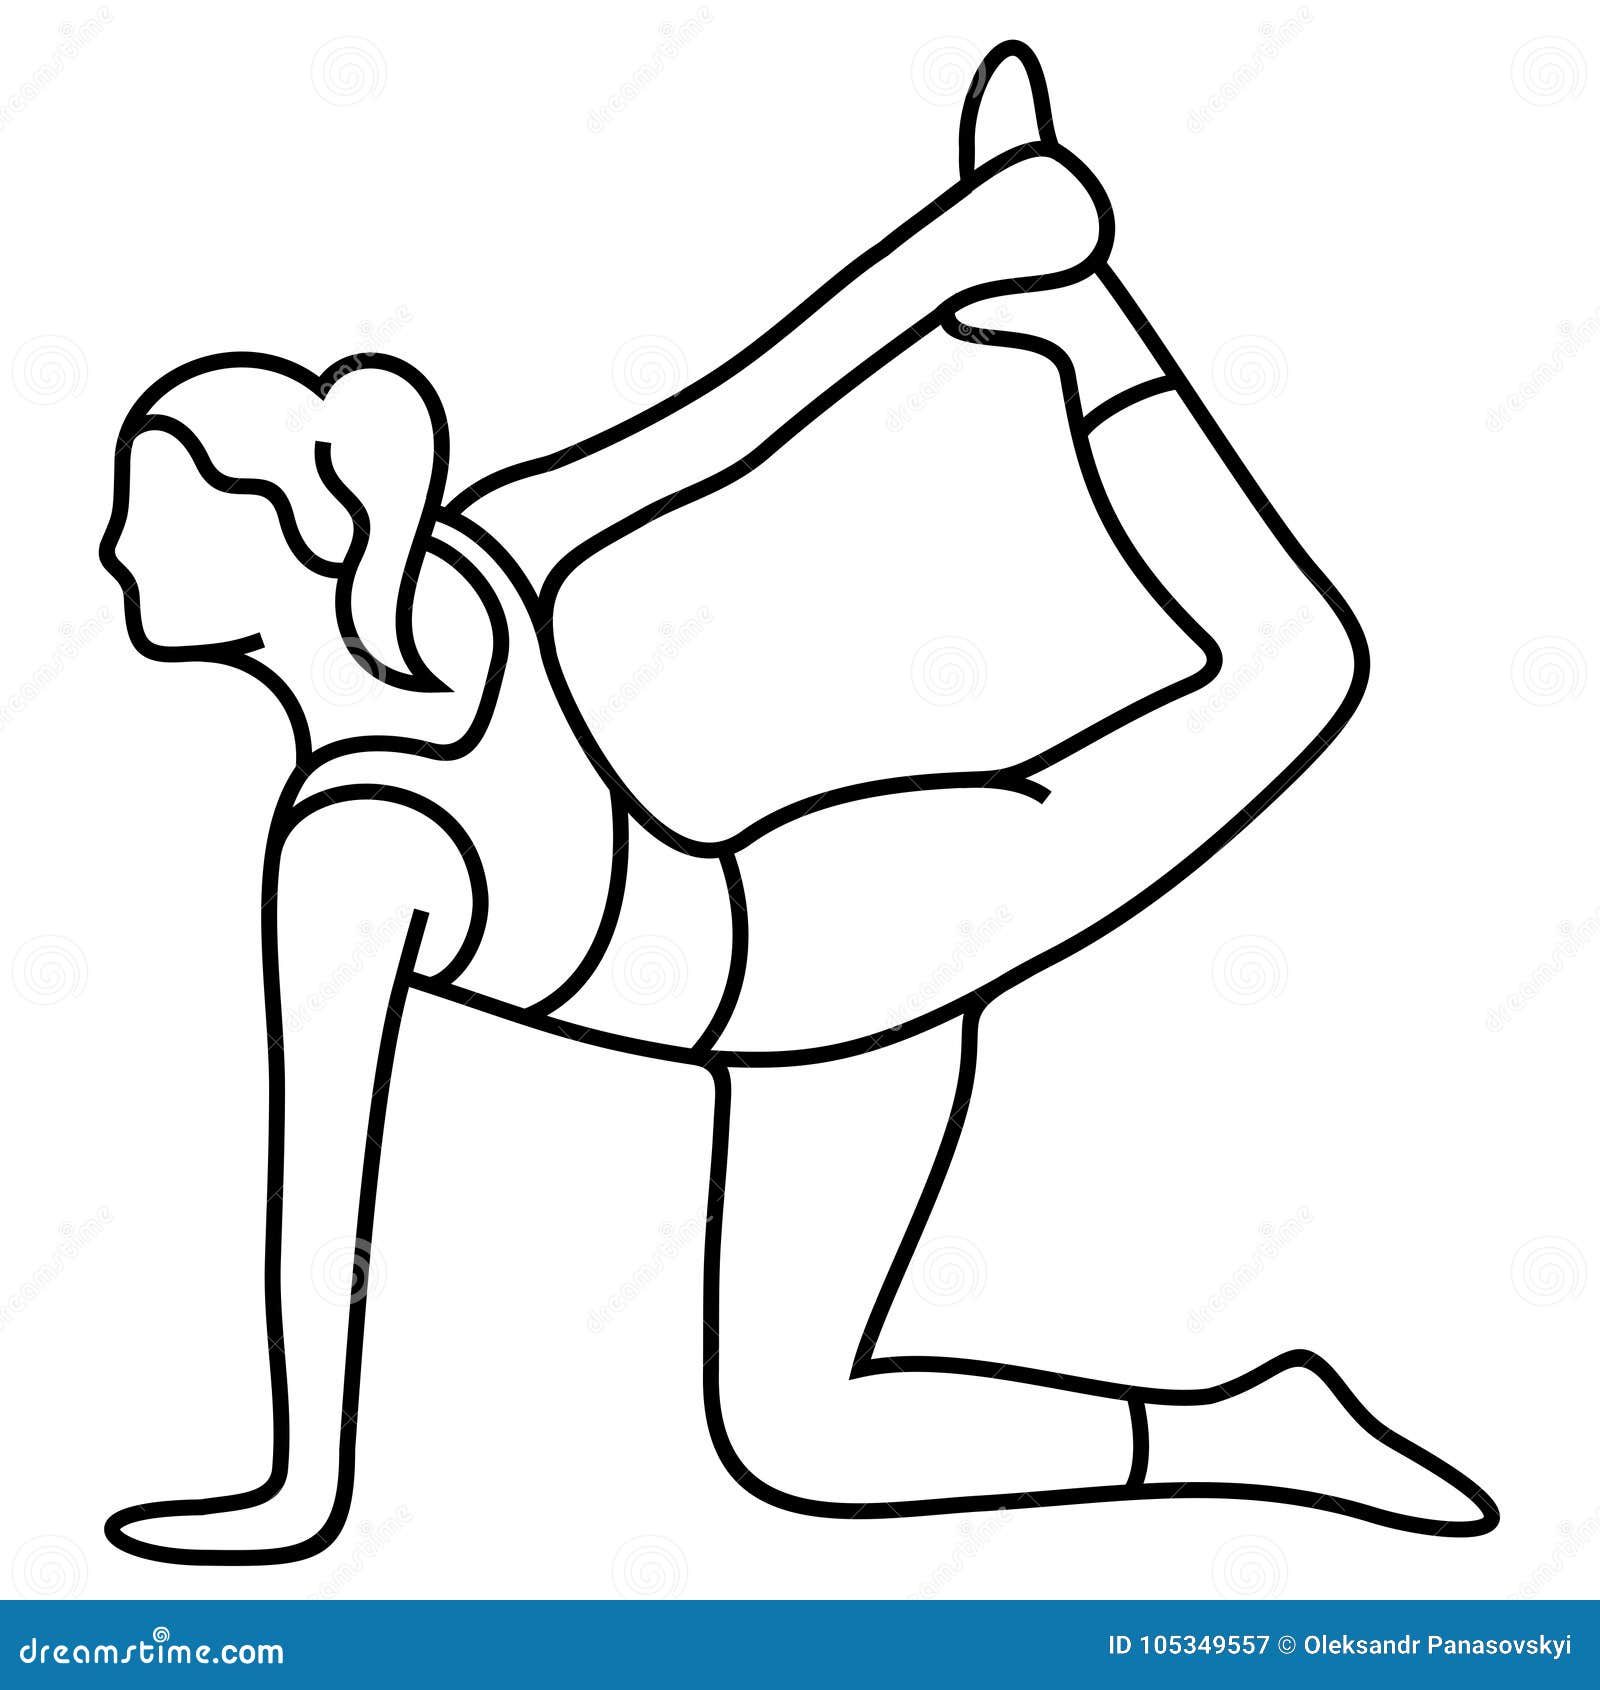 Continuous Line Yoga Pose Sketch Minimal Outline By Amusing, 41% OFF